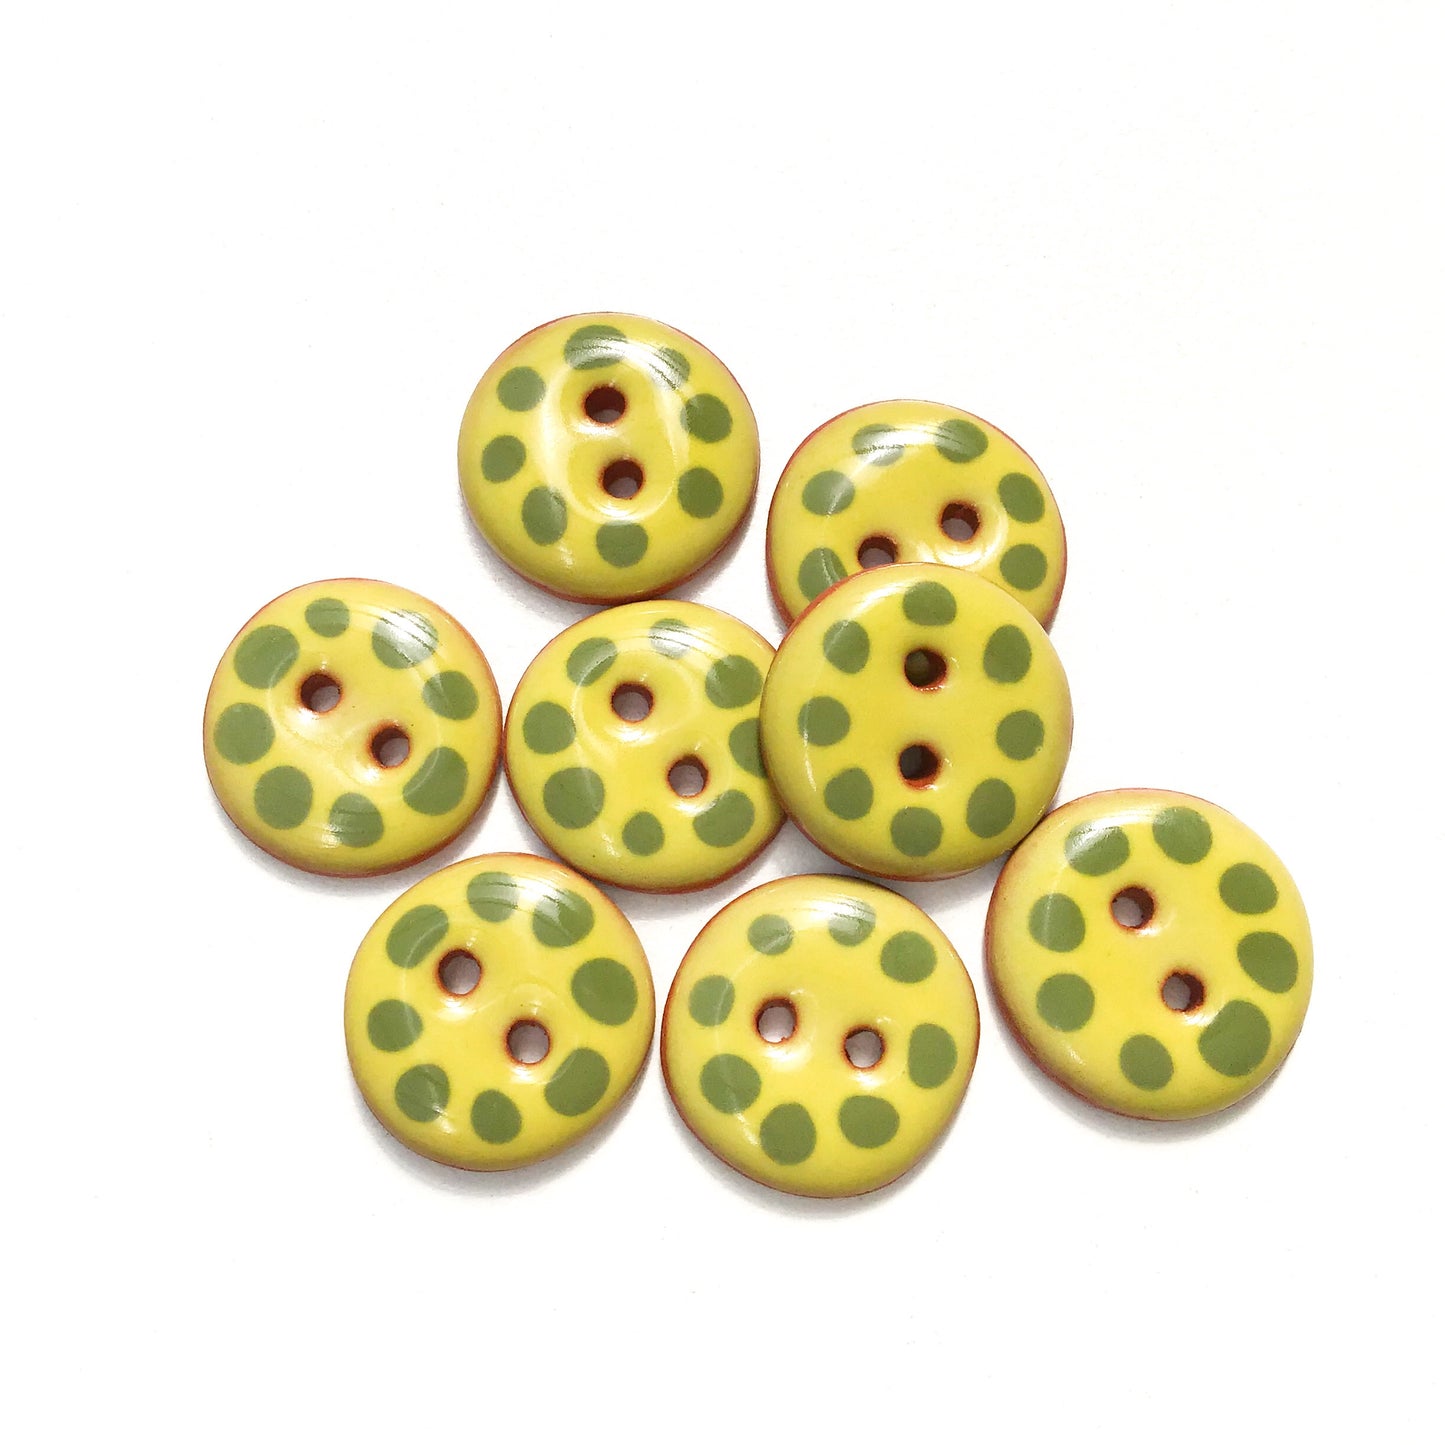 Chartreuse Cobblestone Ceramic Buttons with Olive Green Dots - Chartreuse Clay Buttons - 11/16" - 8 Pack